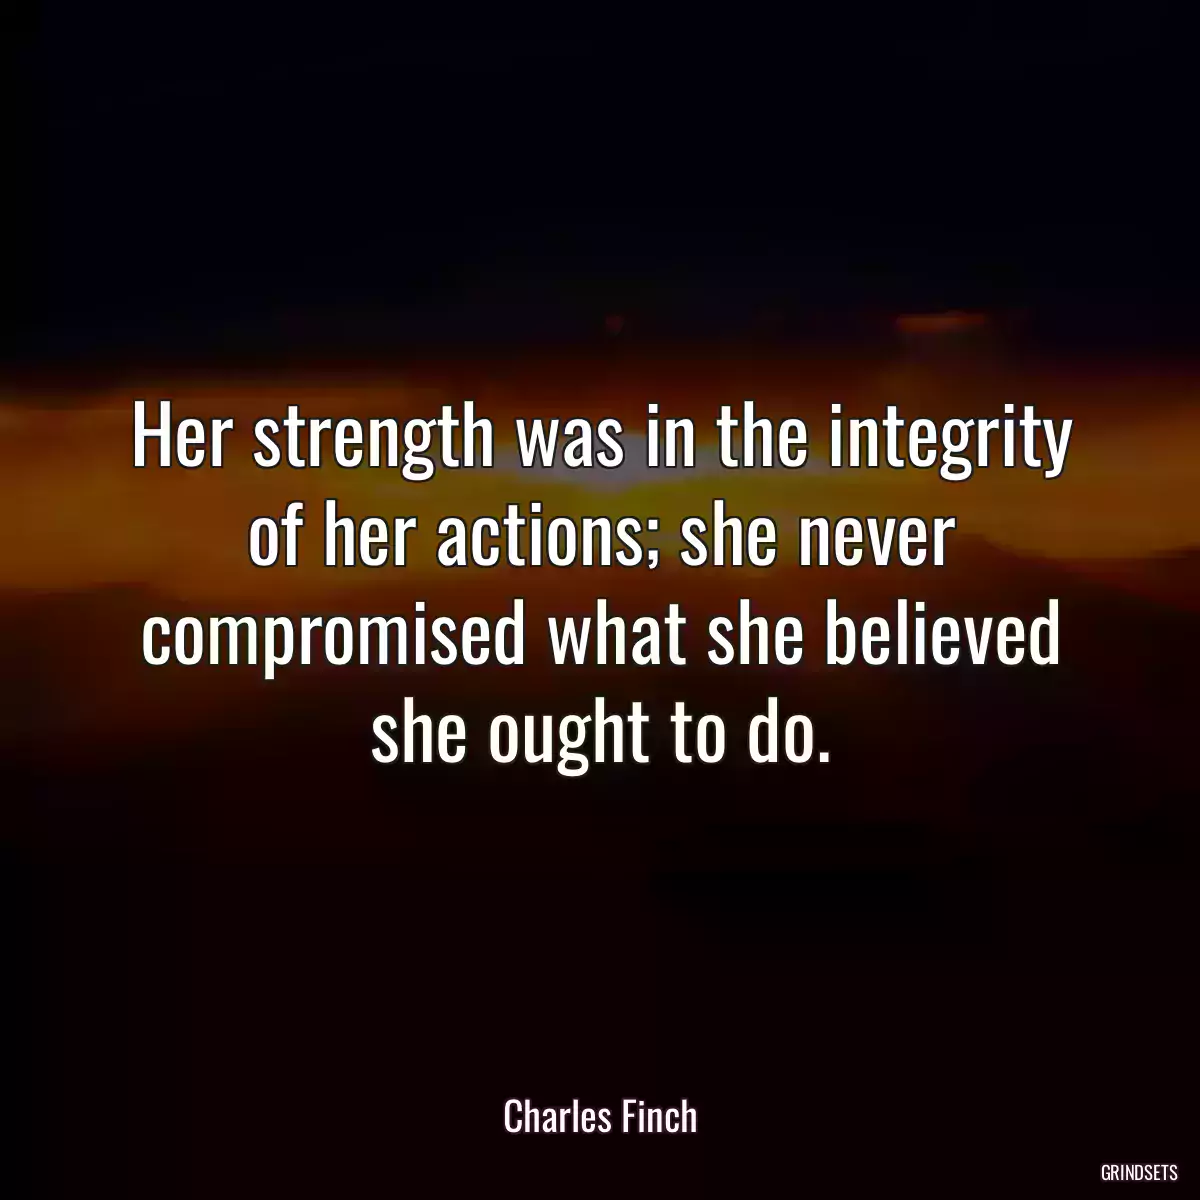 Her strength was in the integrity of her actions; she never compromised what she believed she ought to do.